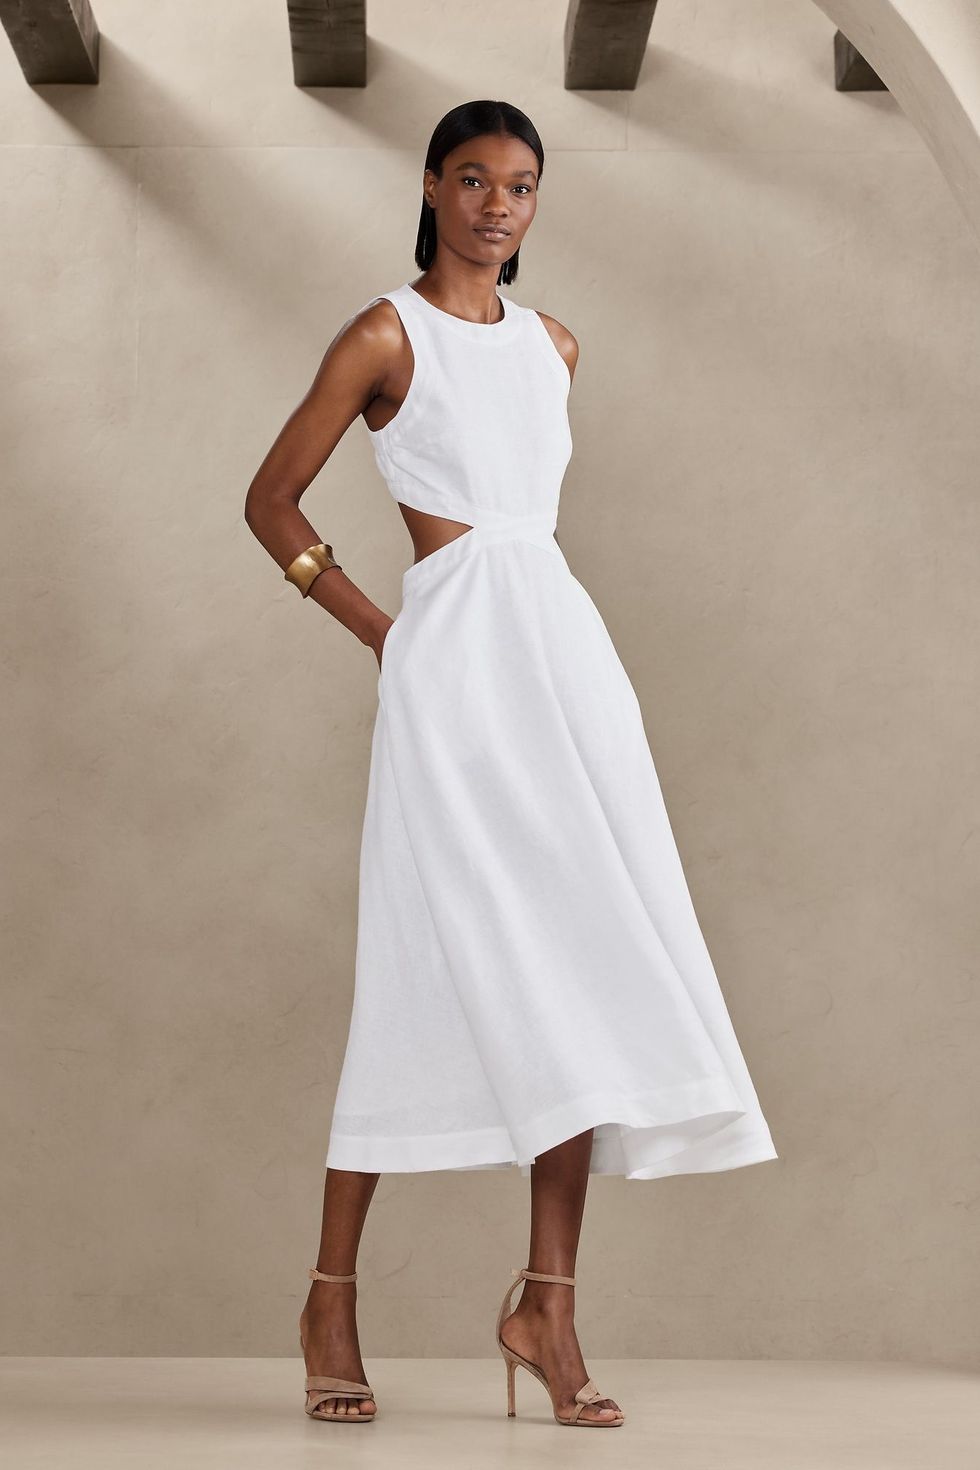 The Quiet Luxury Way to Wear White for Summer - Fashion Jackson